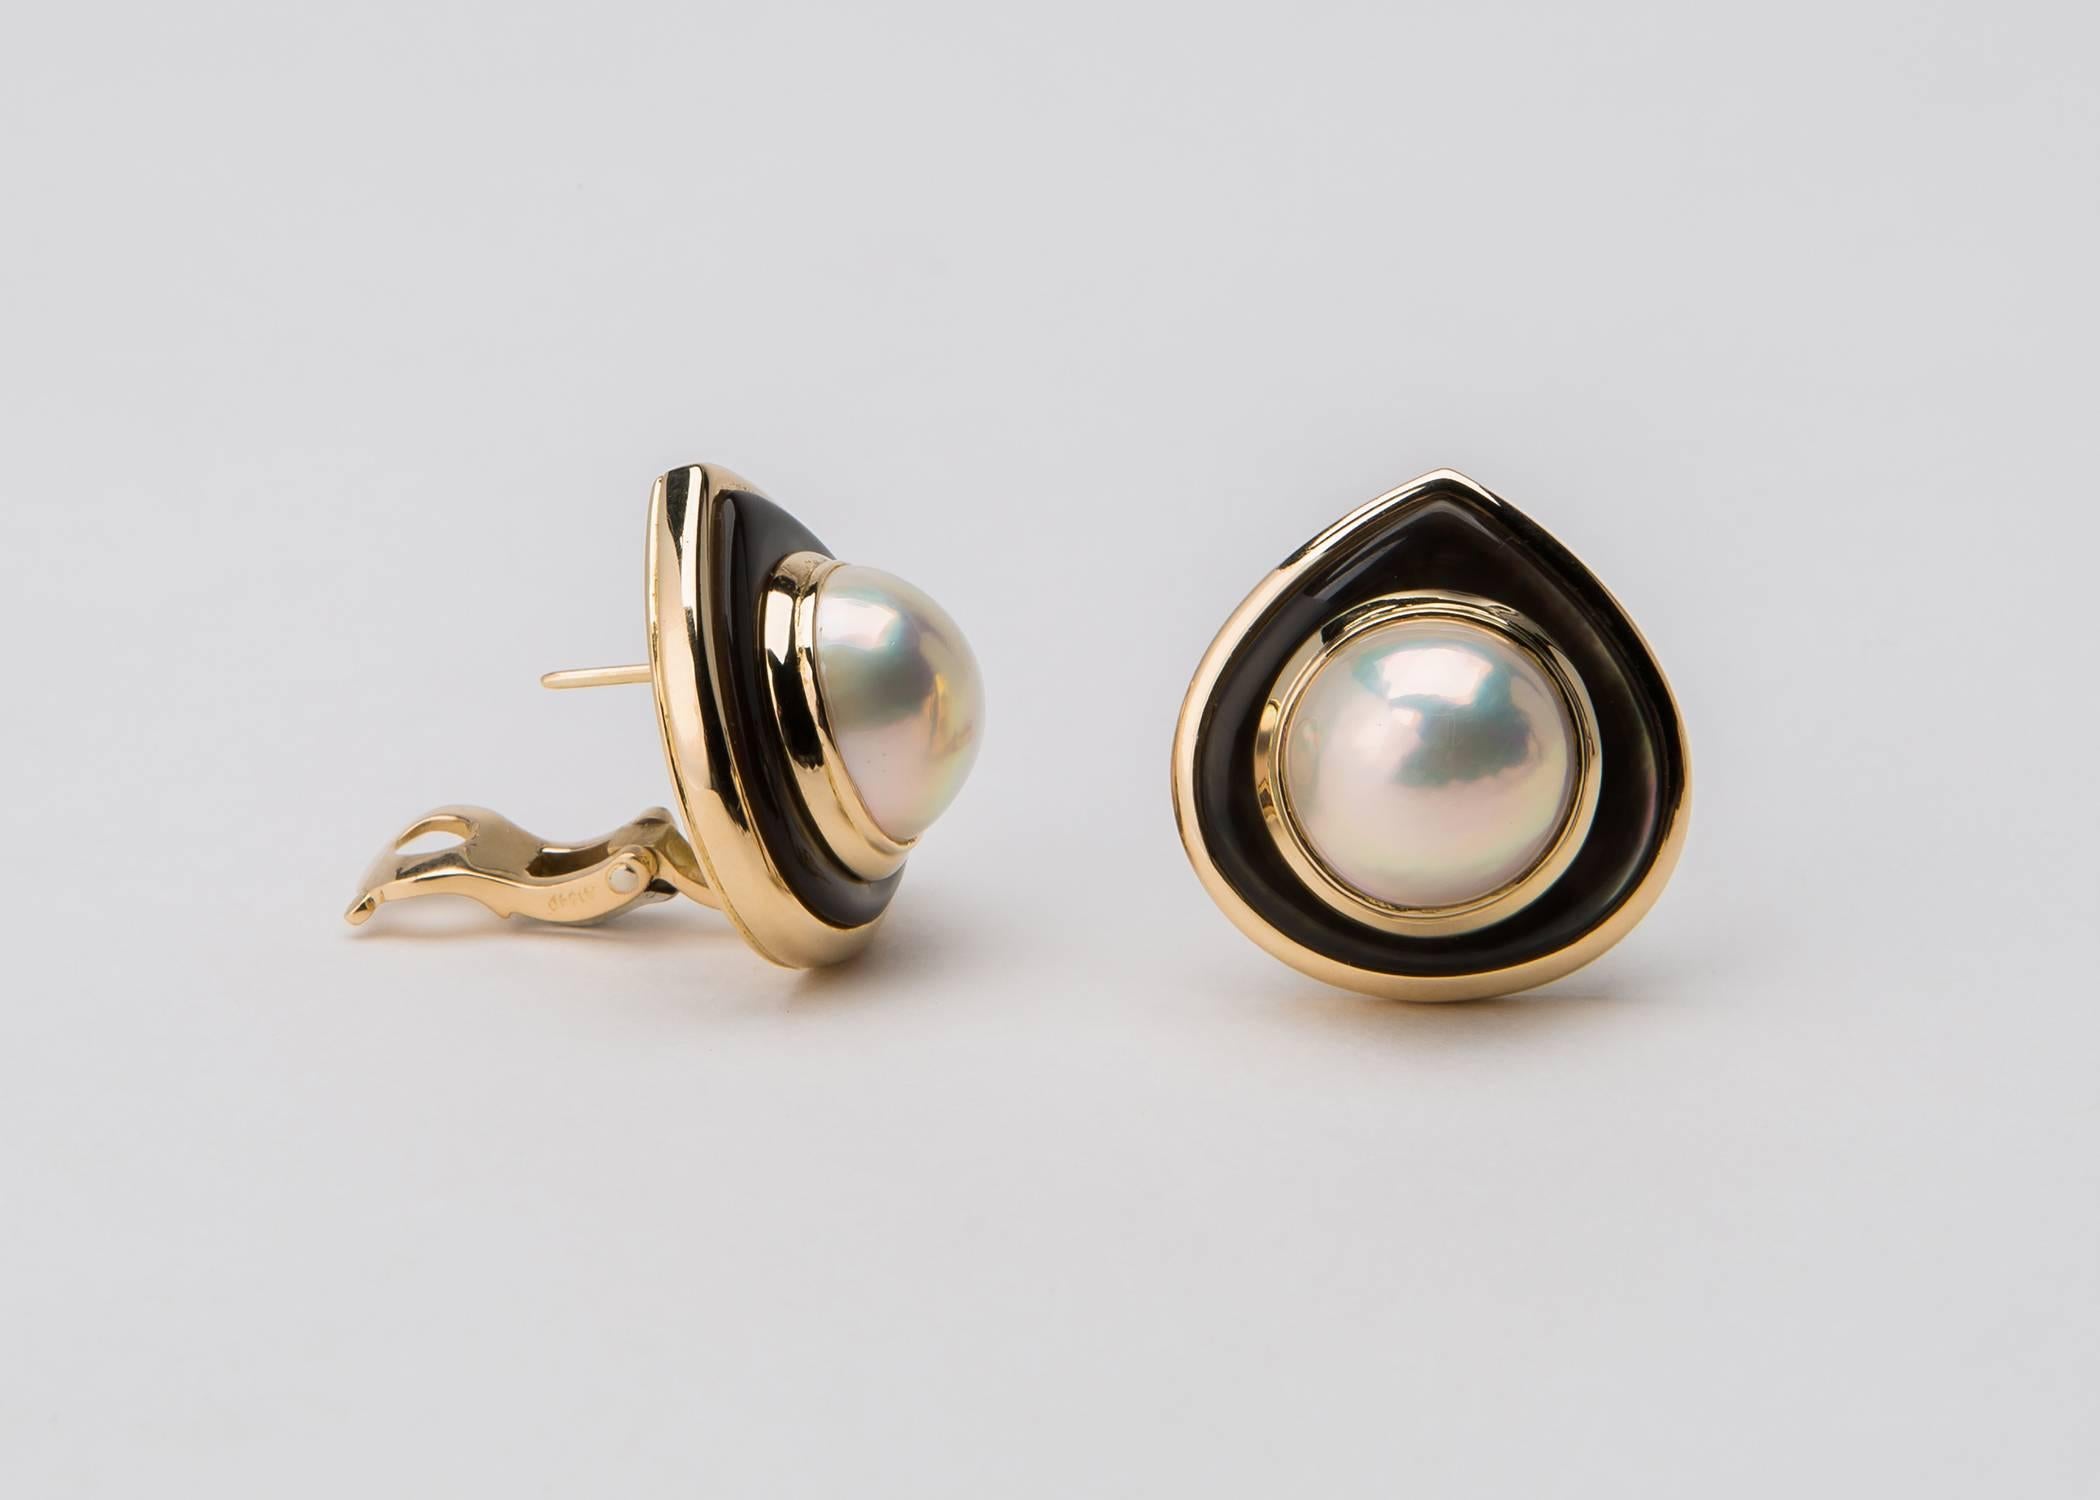 Marina B carries on the Bulgari tradition of great quality and design excellence. A 14.00mm mabe pearl is framed by brownish grey mother of pearl and rich 18k gold. 7/8's of an inch in size. The color of the mother of pearl in the first image is